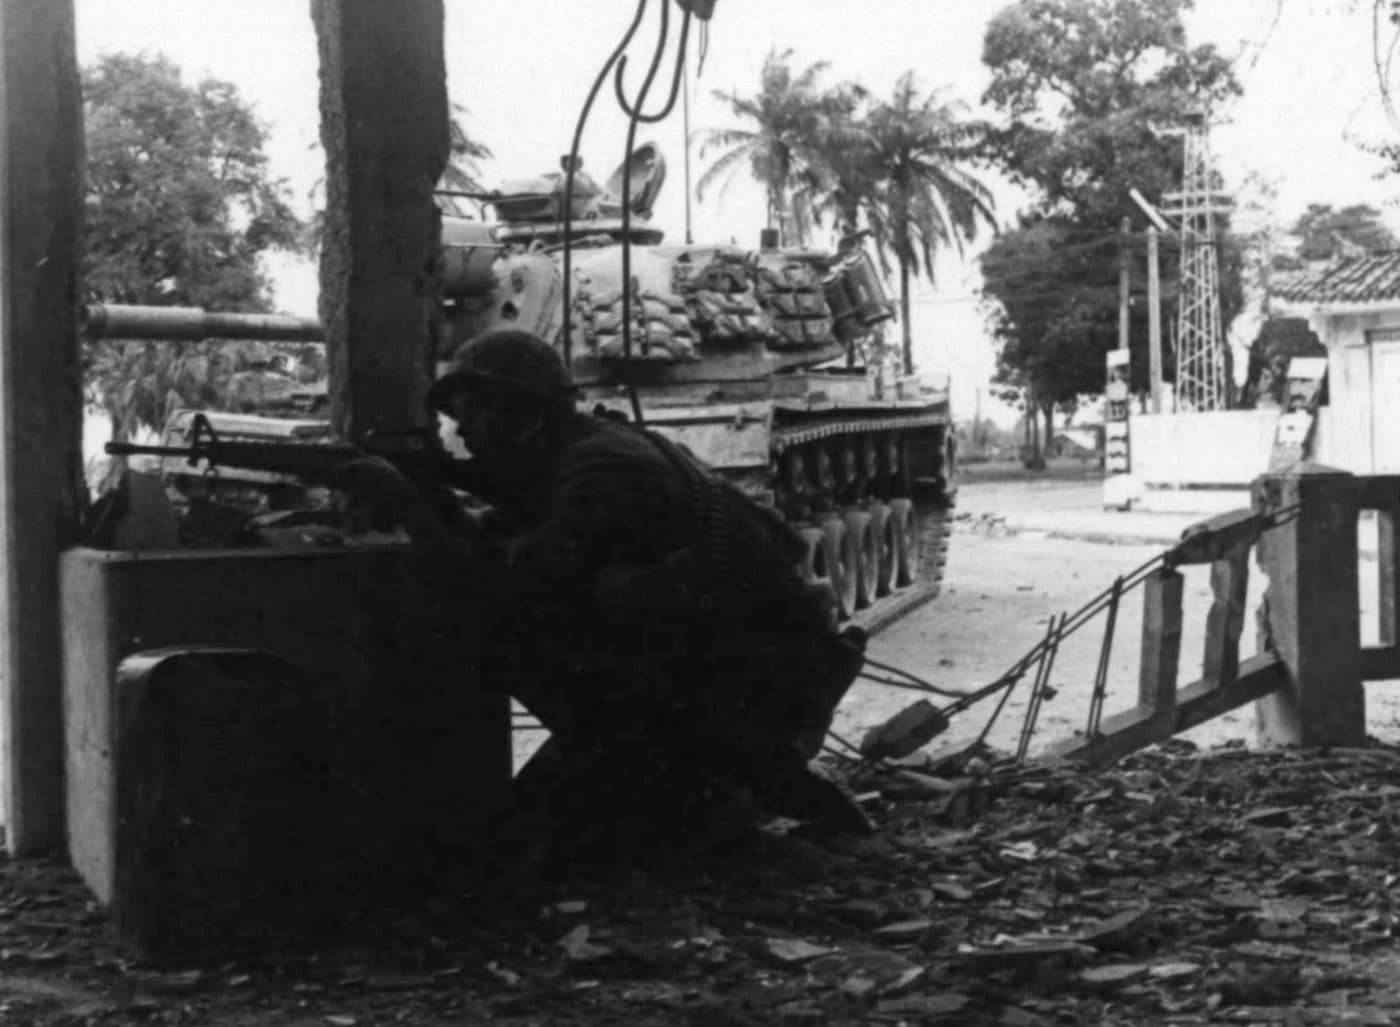 us marines fighting with m48 patton tank in hue city during tet offensive